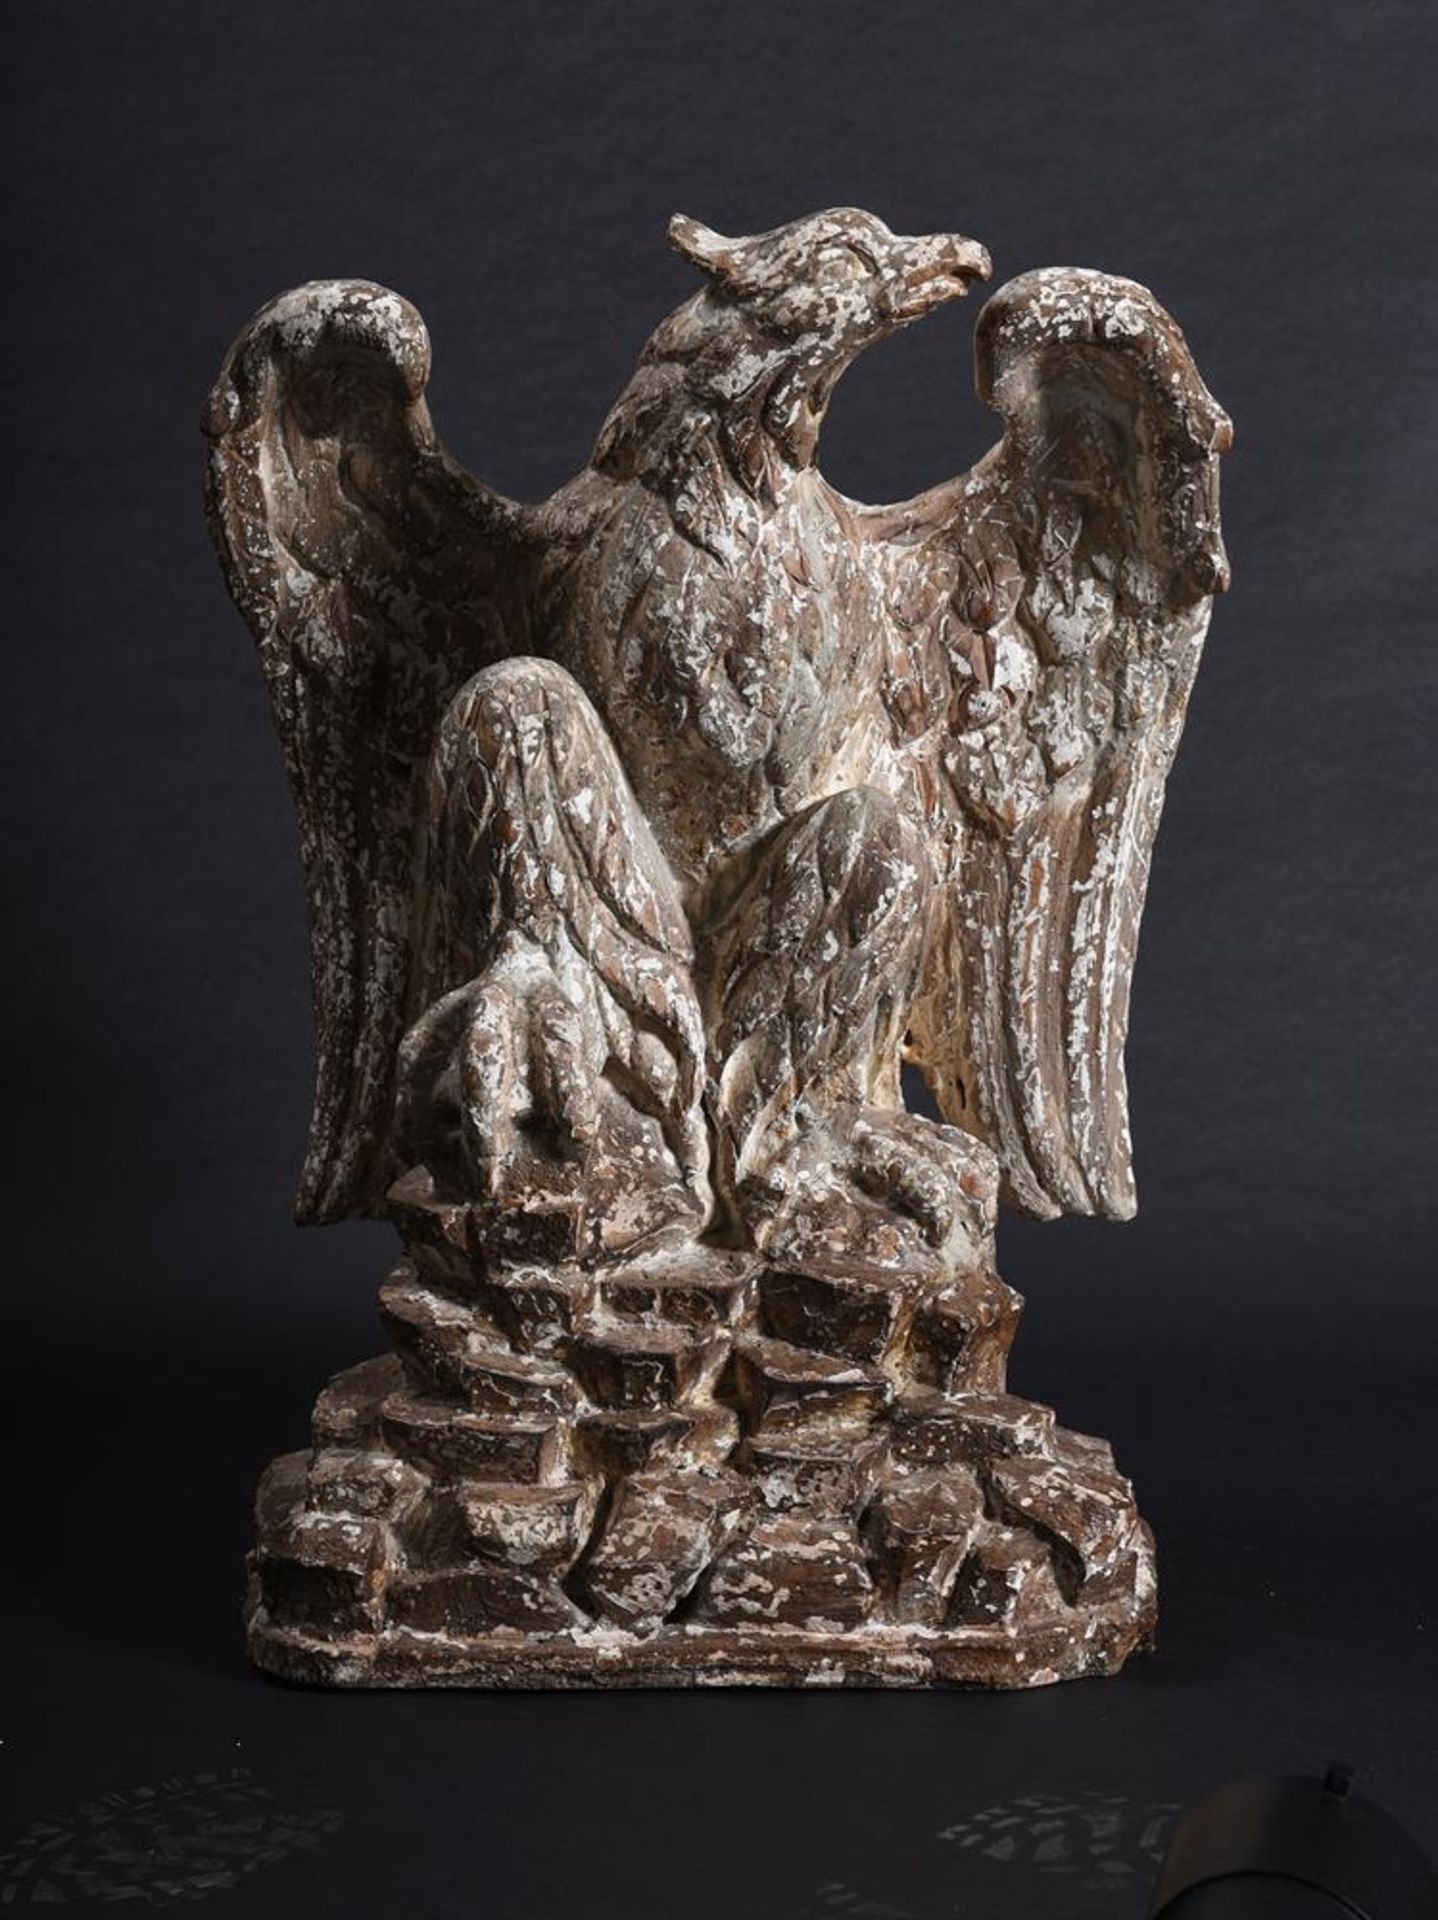 A LARGE CARVED AND PAINTED FIGURE OF AN EAGLE, IN THE MANNER OF WILLIAM KENT - Image 2 of 4